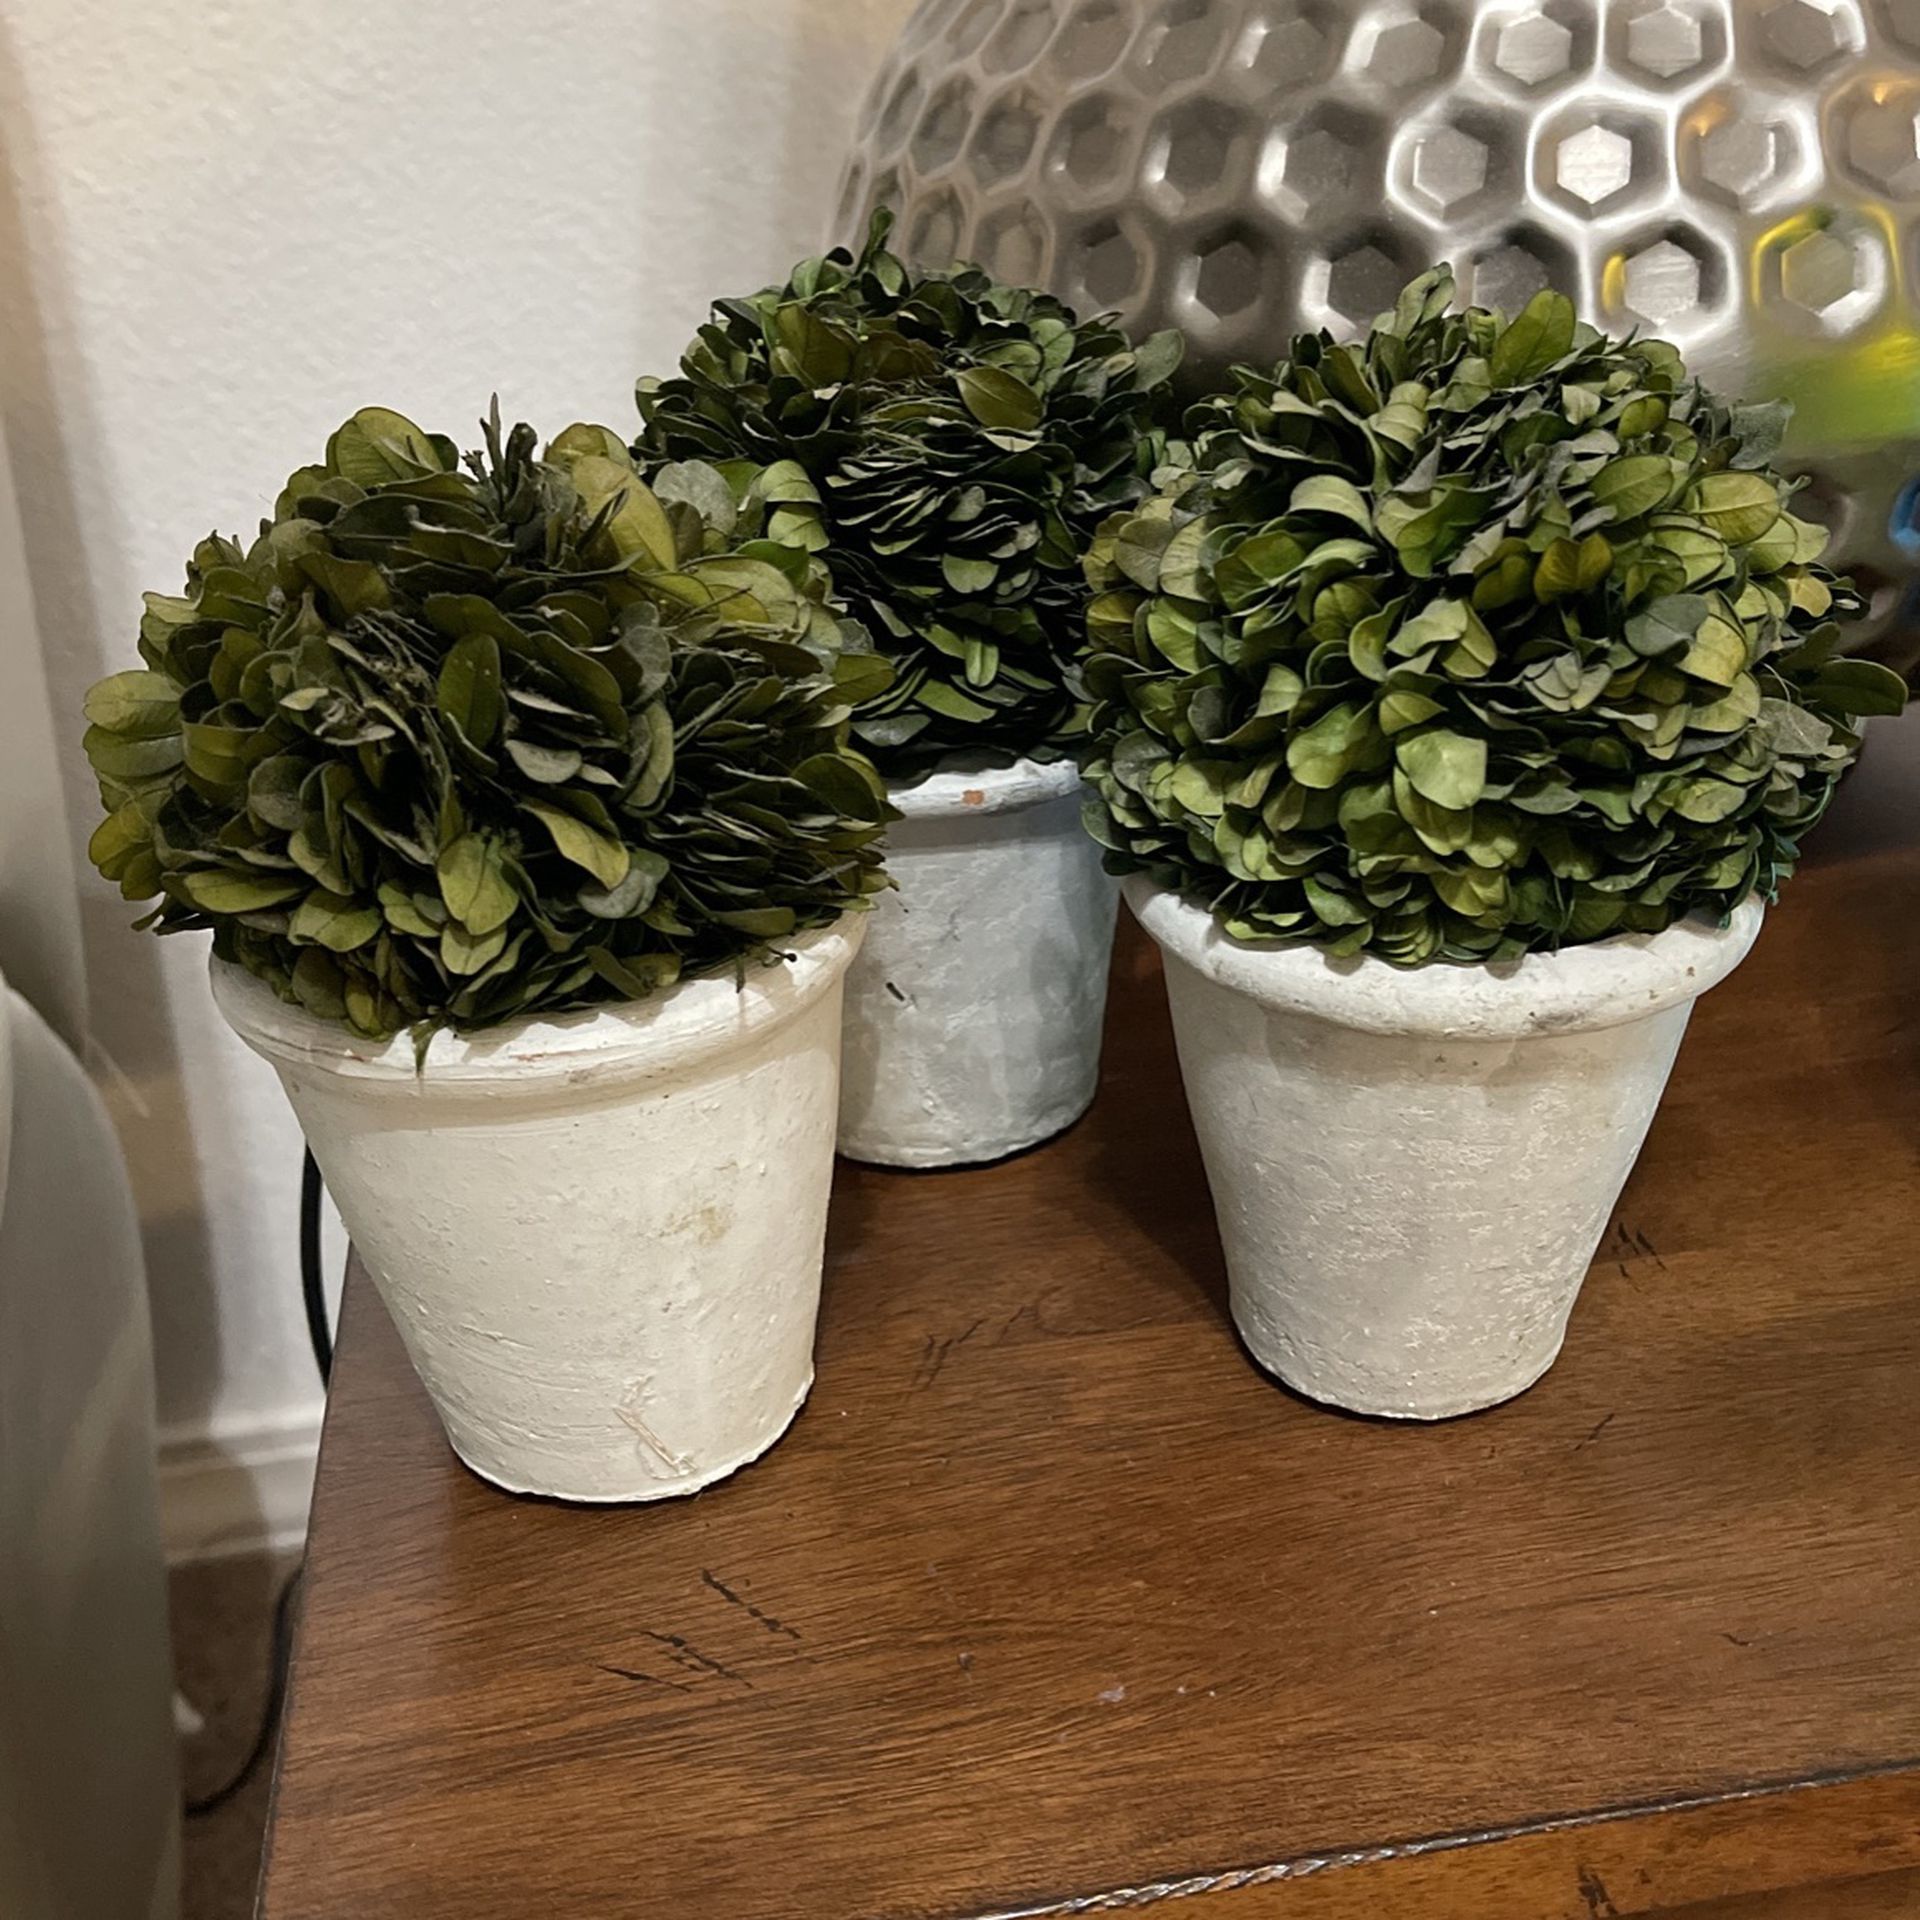 3 Topiary Plants From Pier 1 Imports